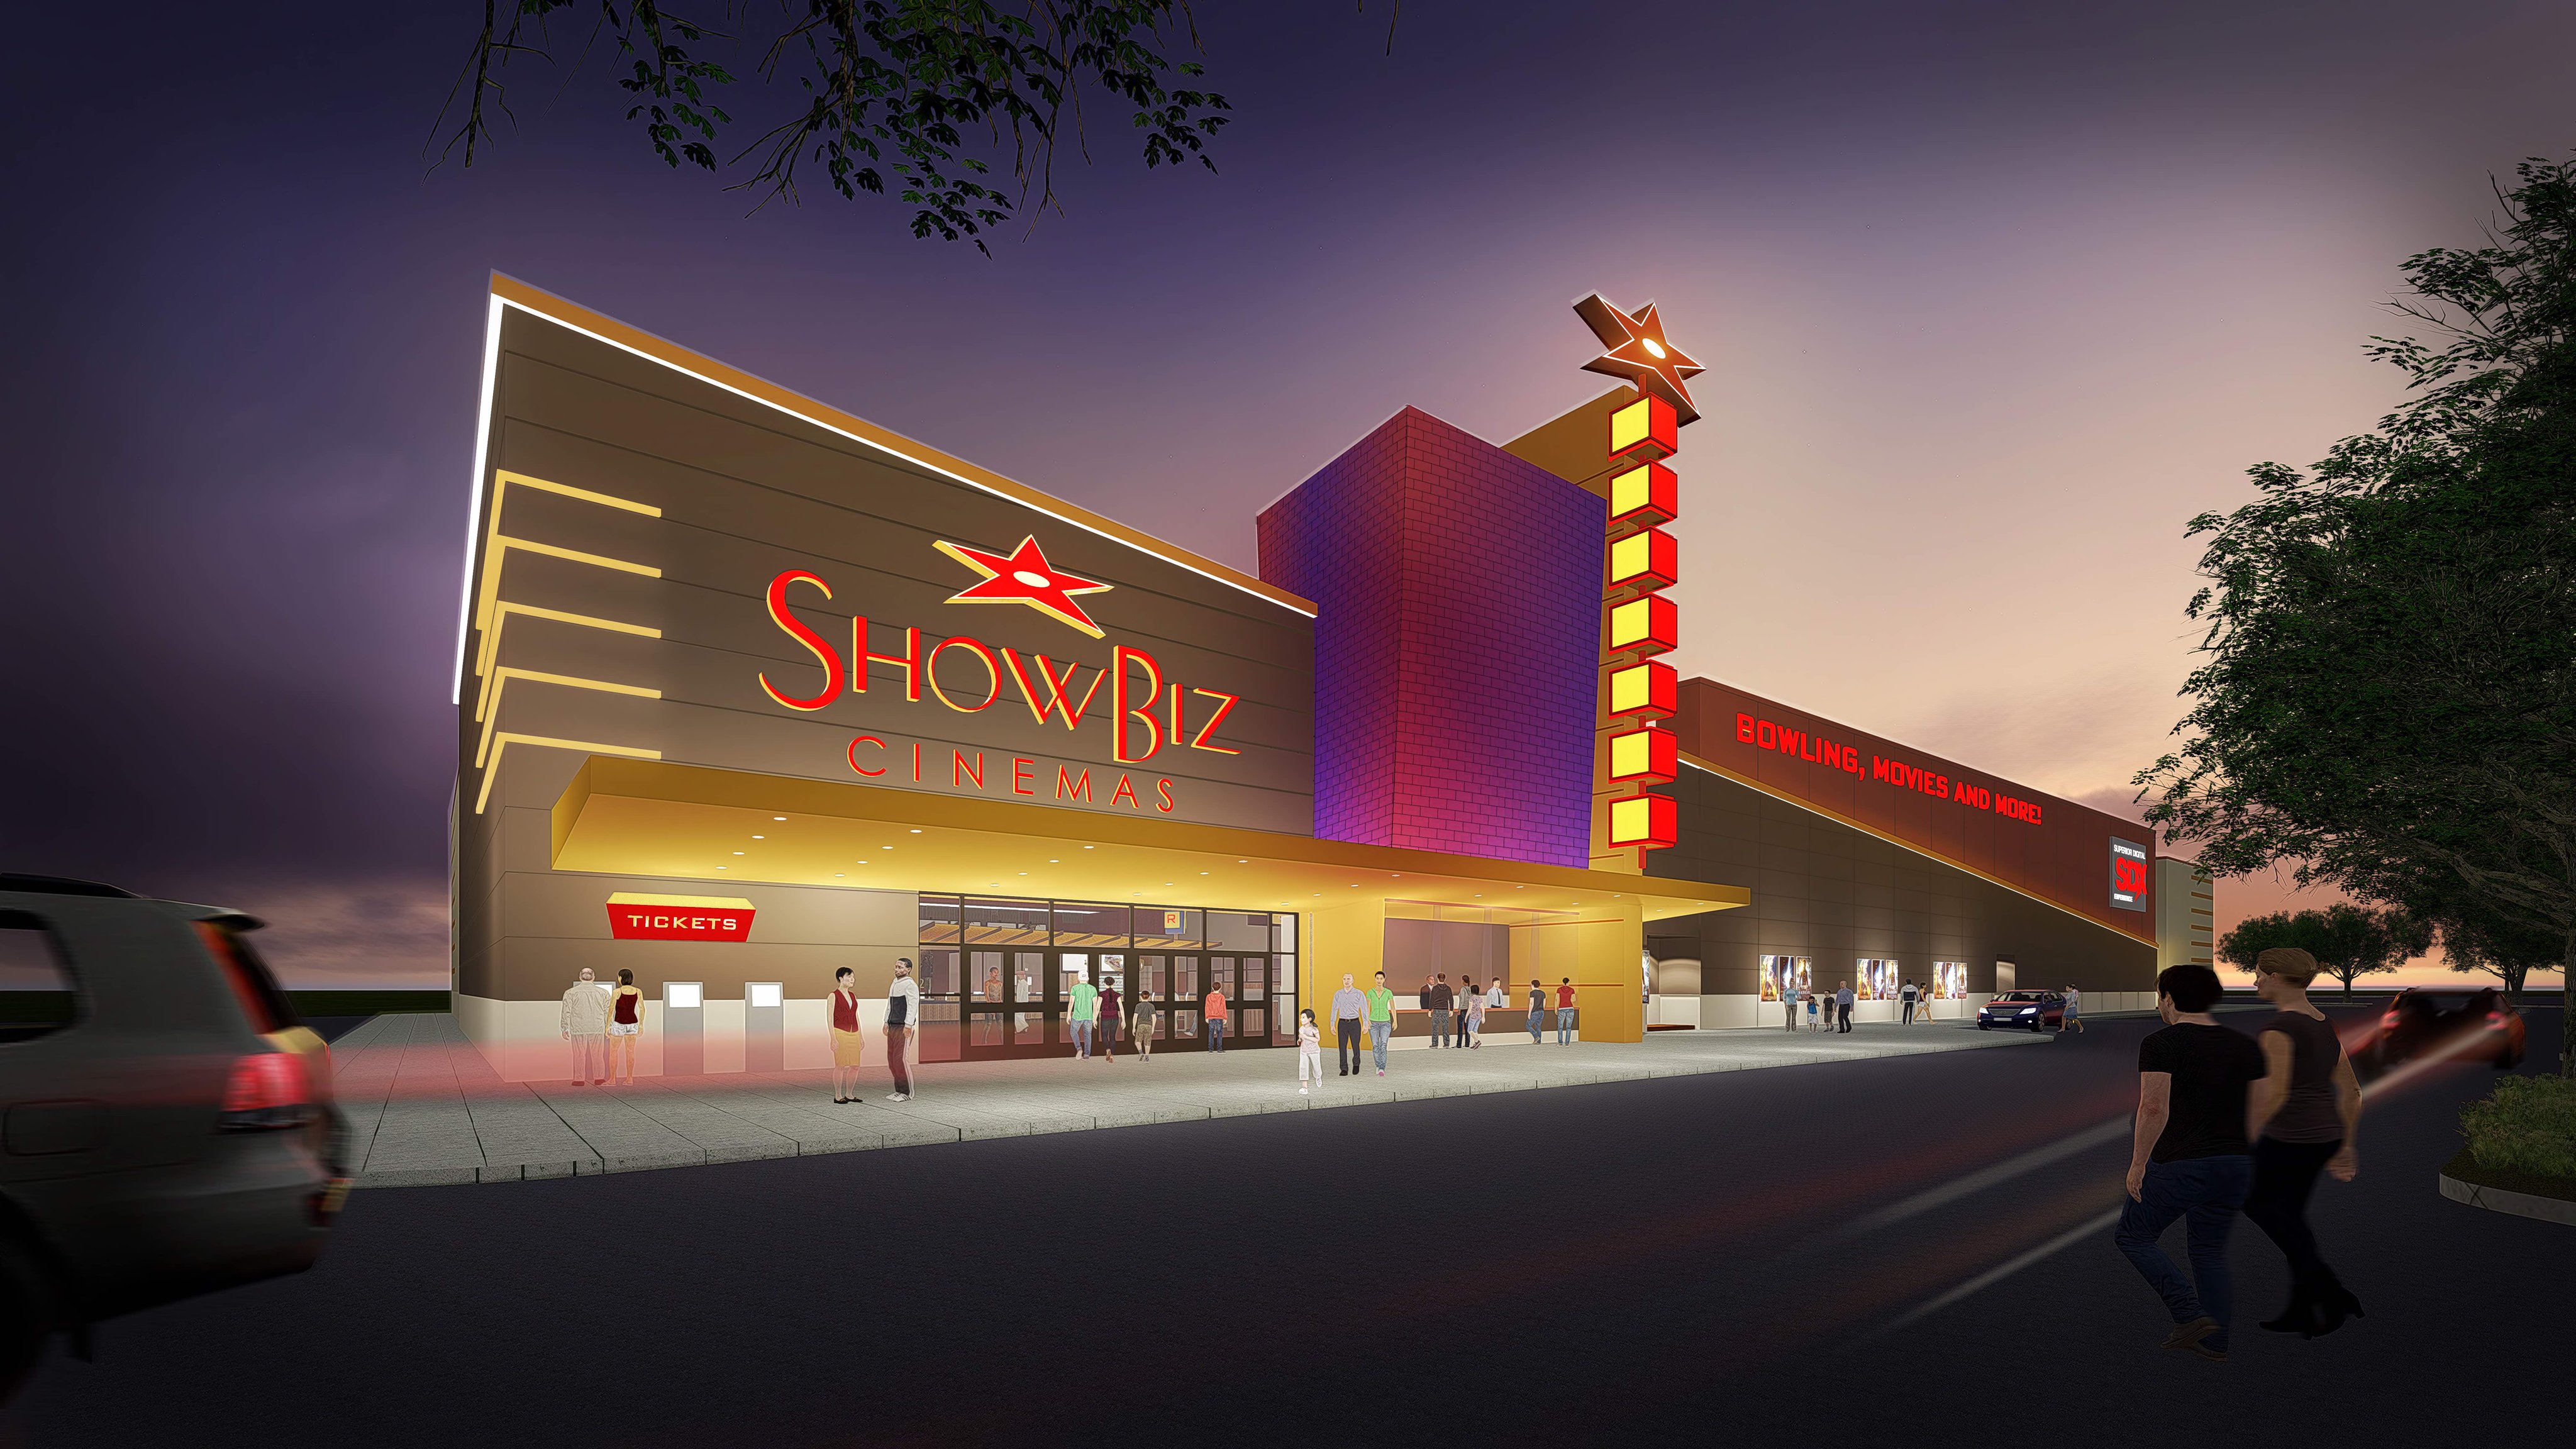 Showbiz Cinemas Bowling Movies And More On Twitter New Theaterbowling Opens Oct Baytown Tx This Satsun 10am-7pm Win Movie Passes Free Hot Dogs Only In Baytown Httptcovveje6kes8 Twitter